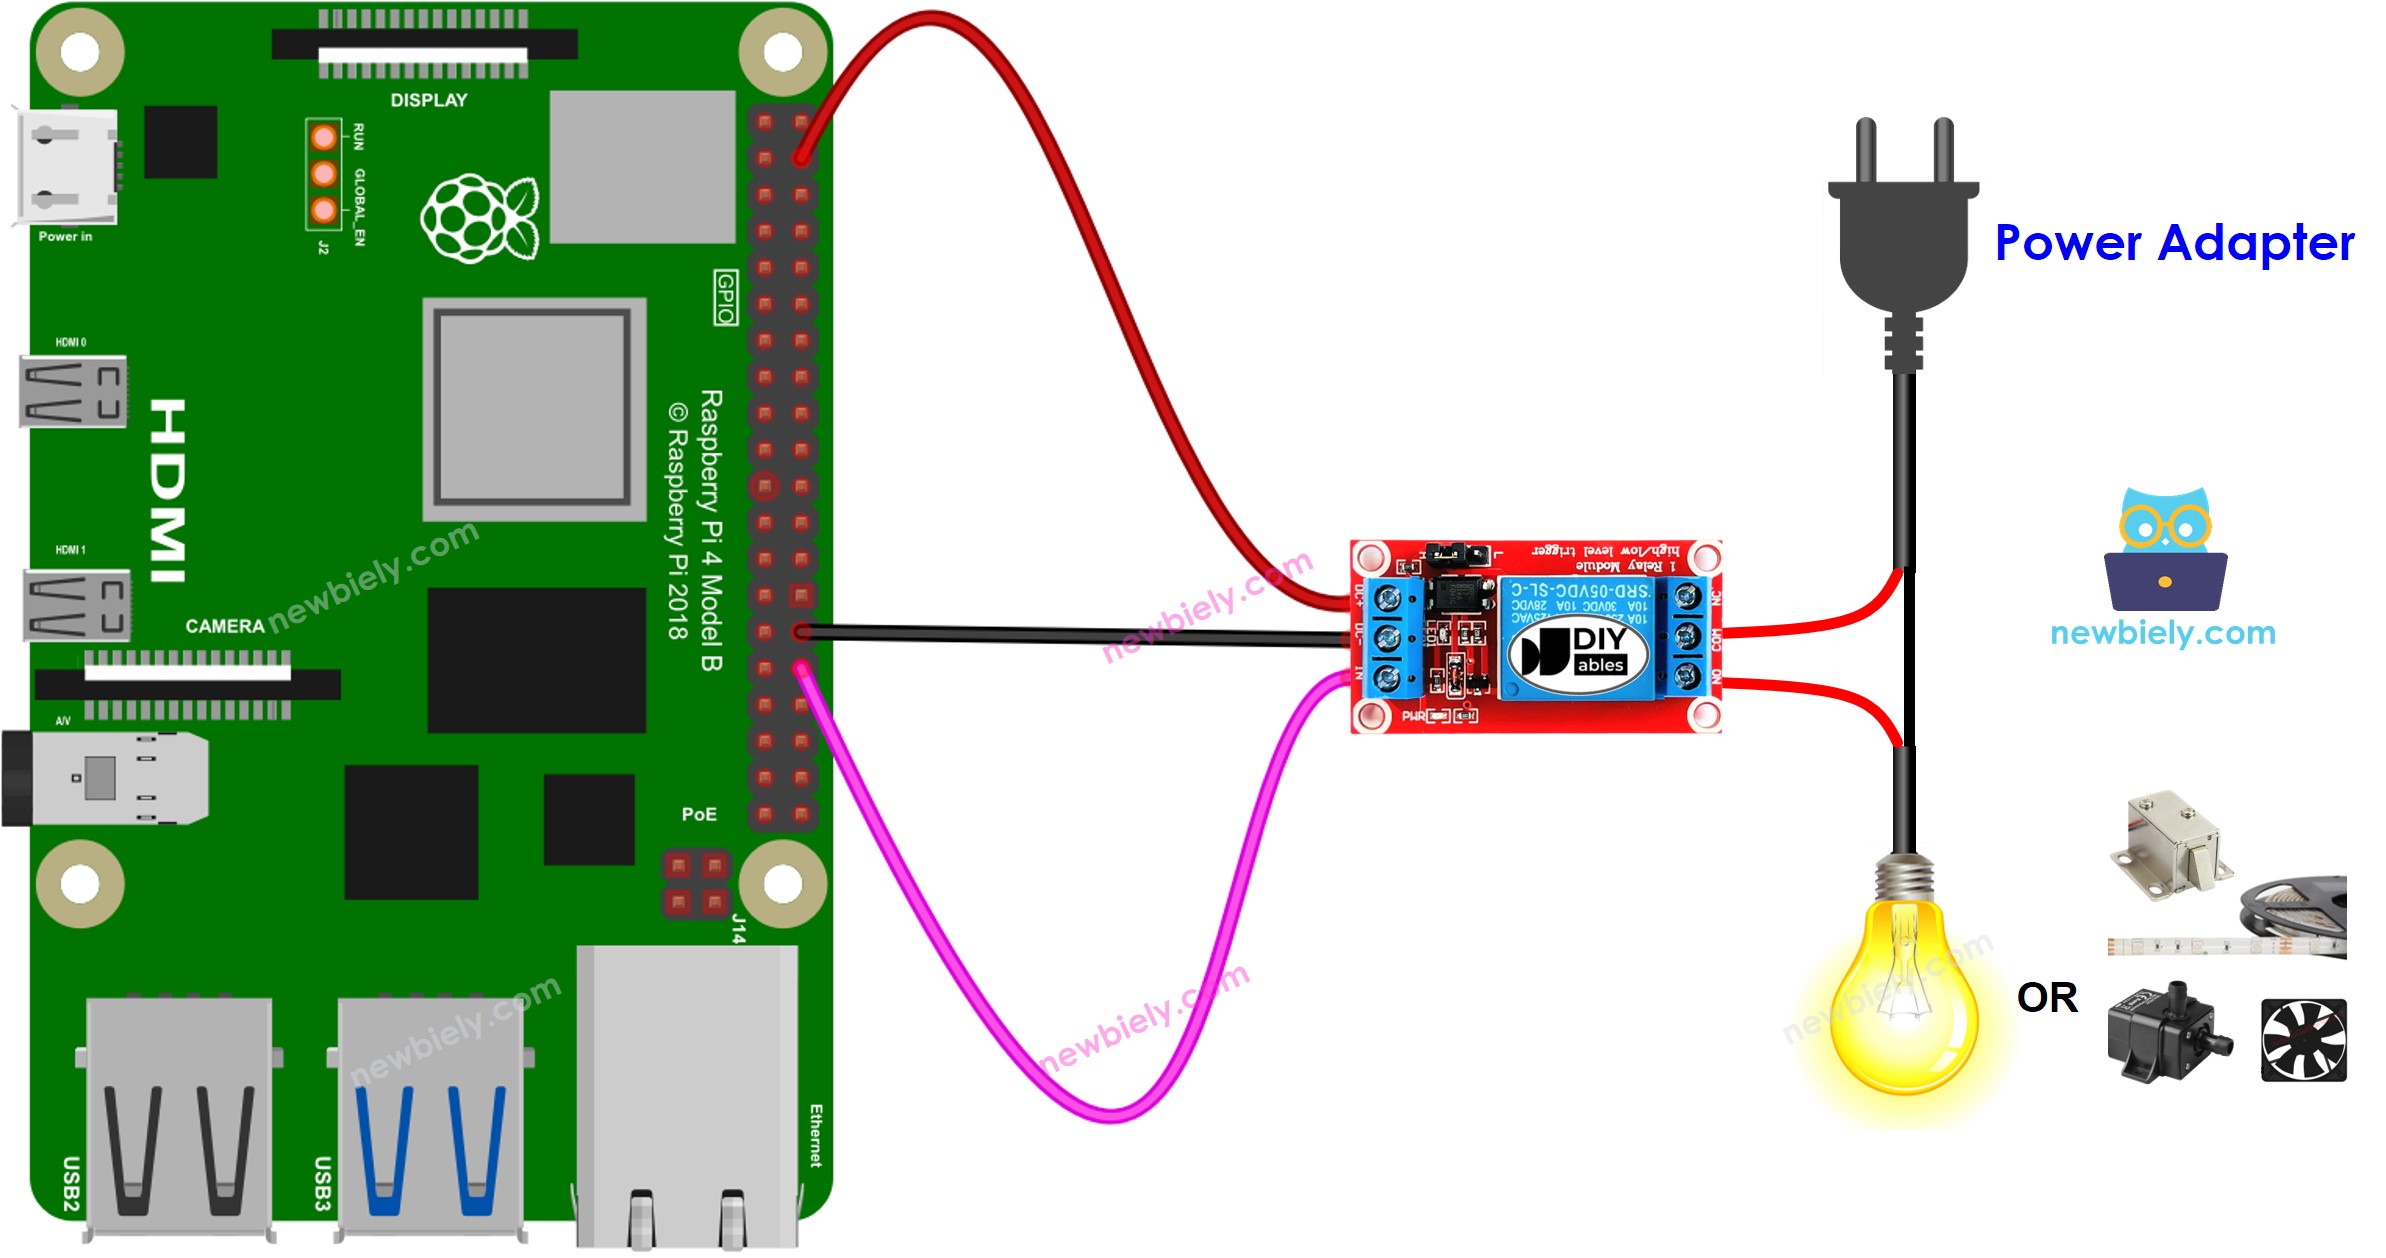 The wiring diagram between Raspberry Pi and Relay